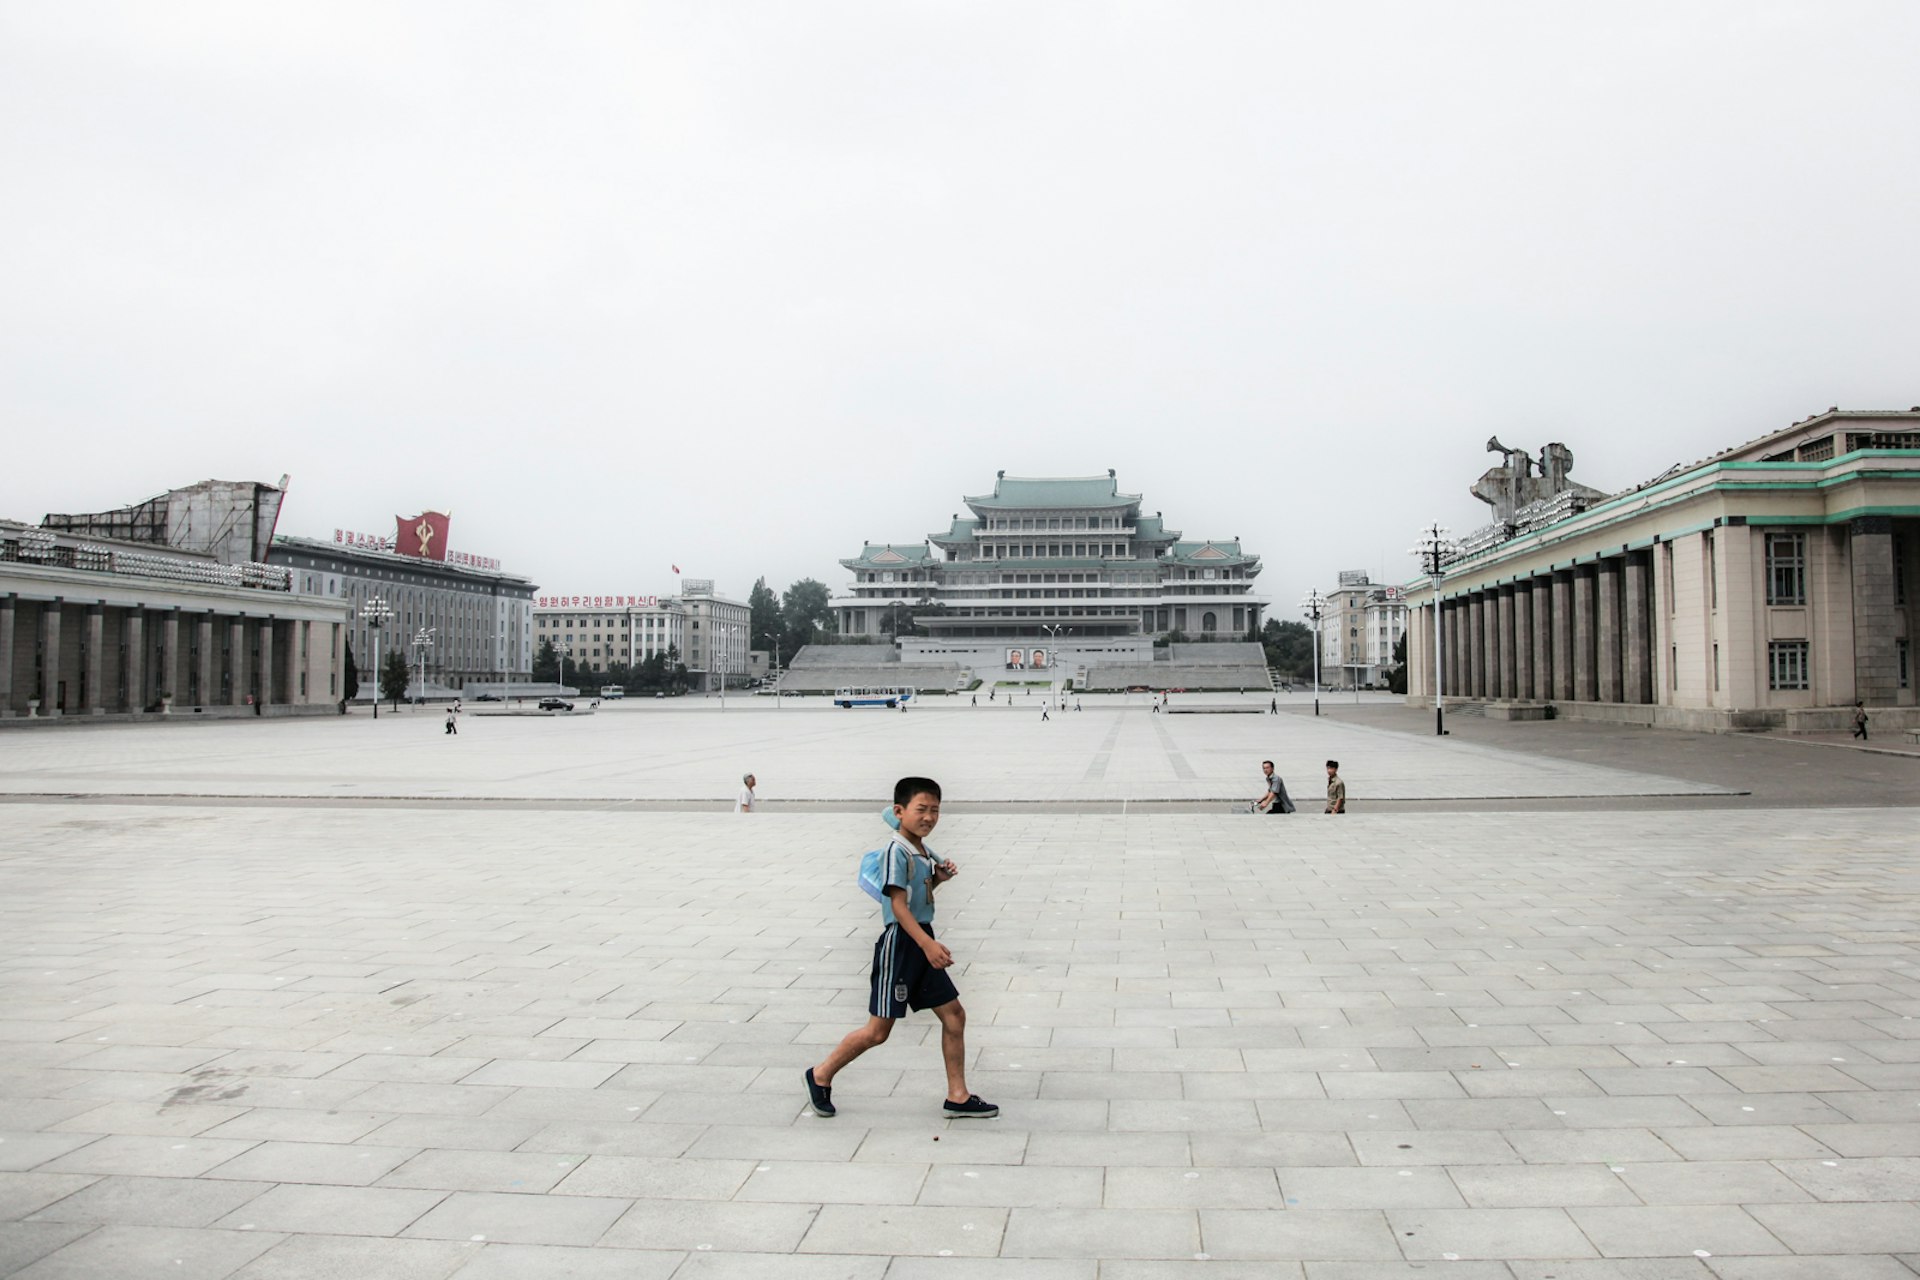 A North Korean boy in Pyongyang’s central square.